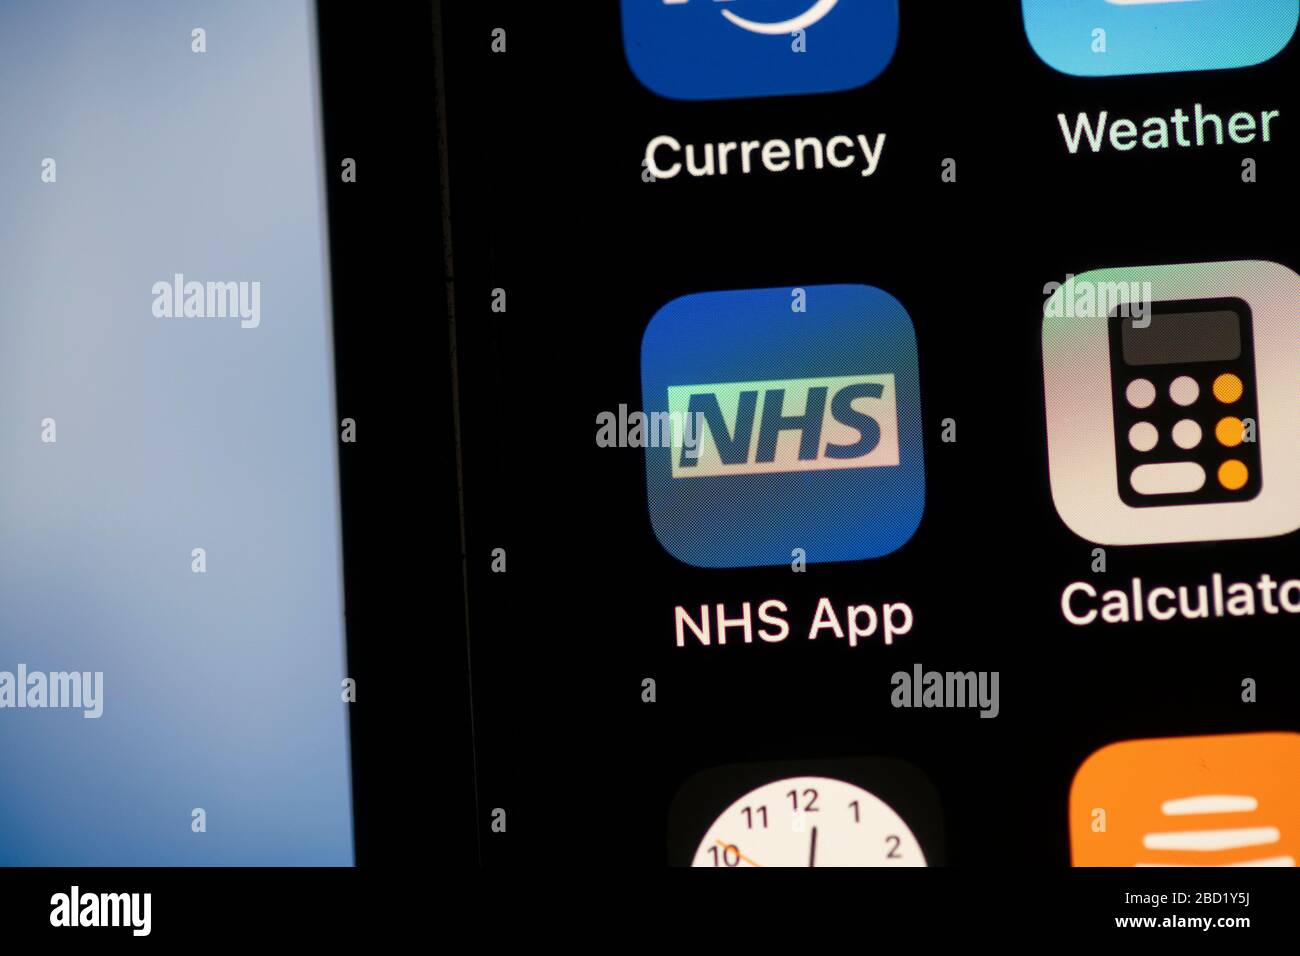 LONDON, UK - April 6th 2020: NHS National health service app on a smartphone Stock Photo